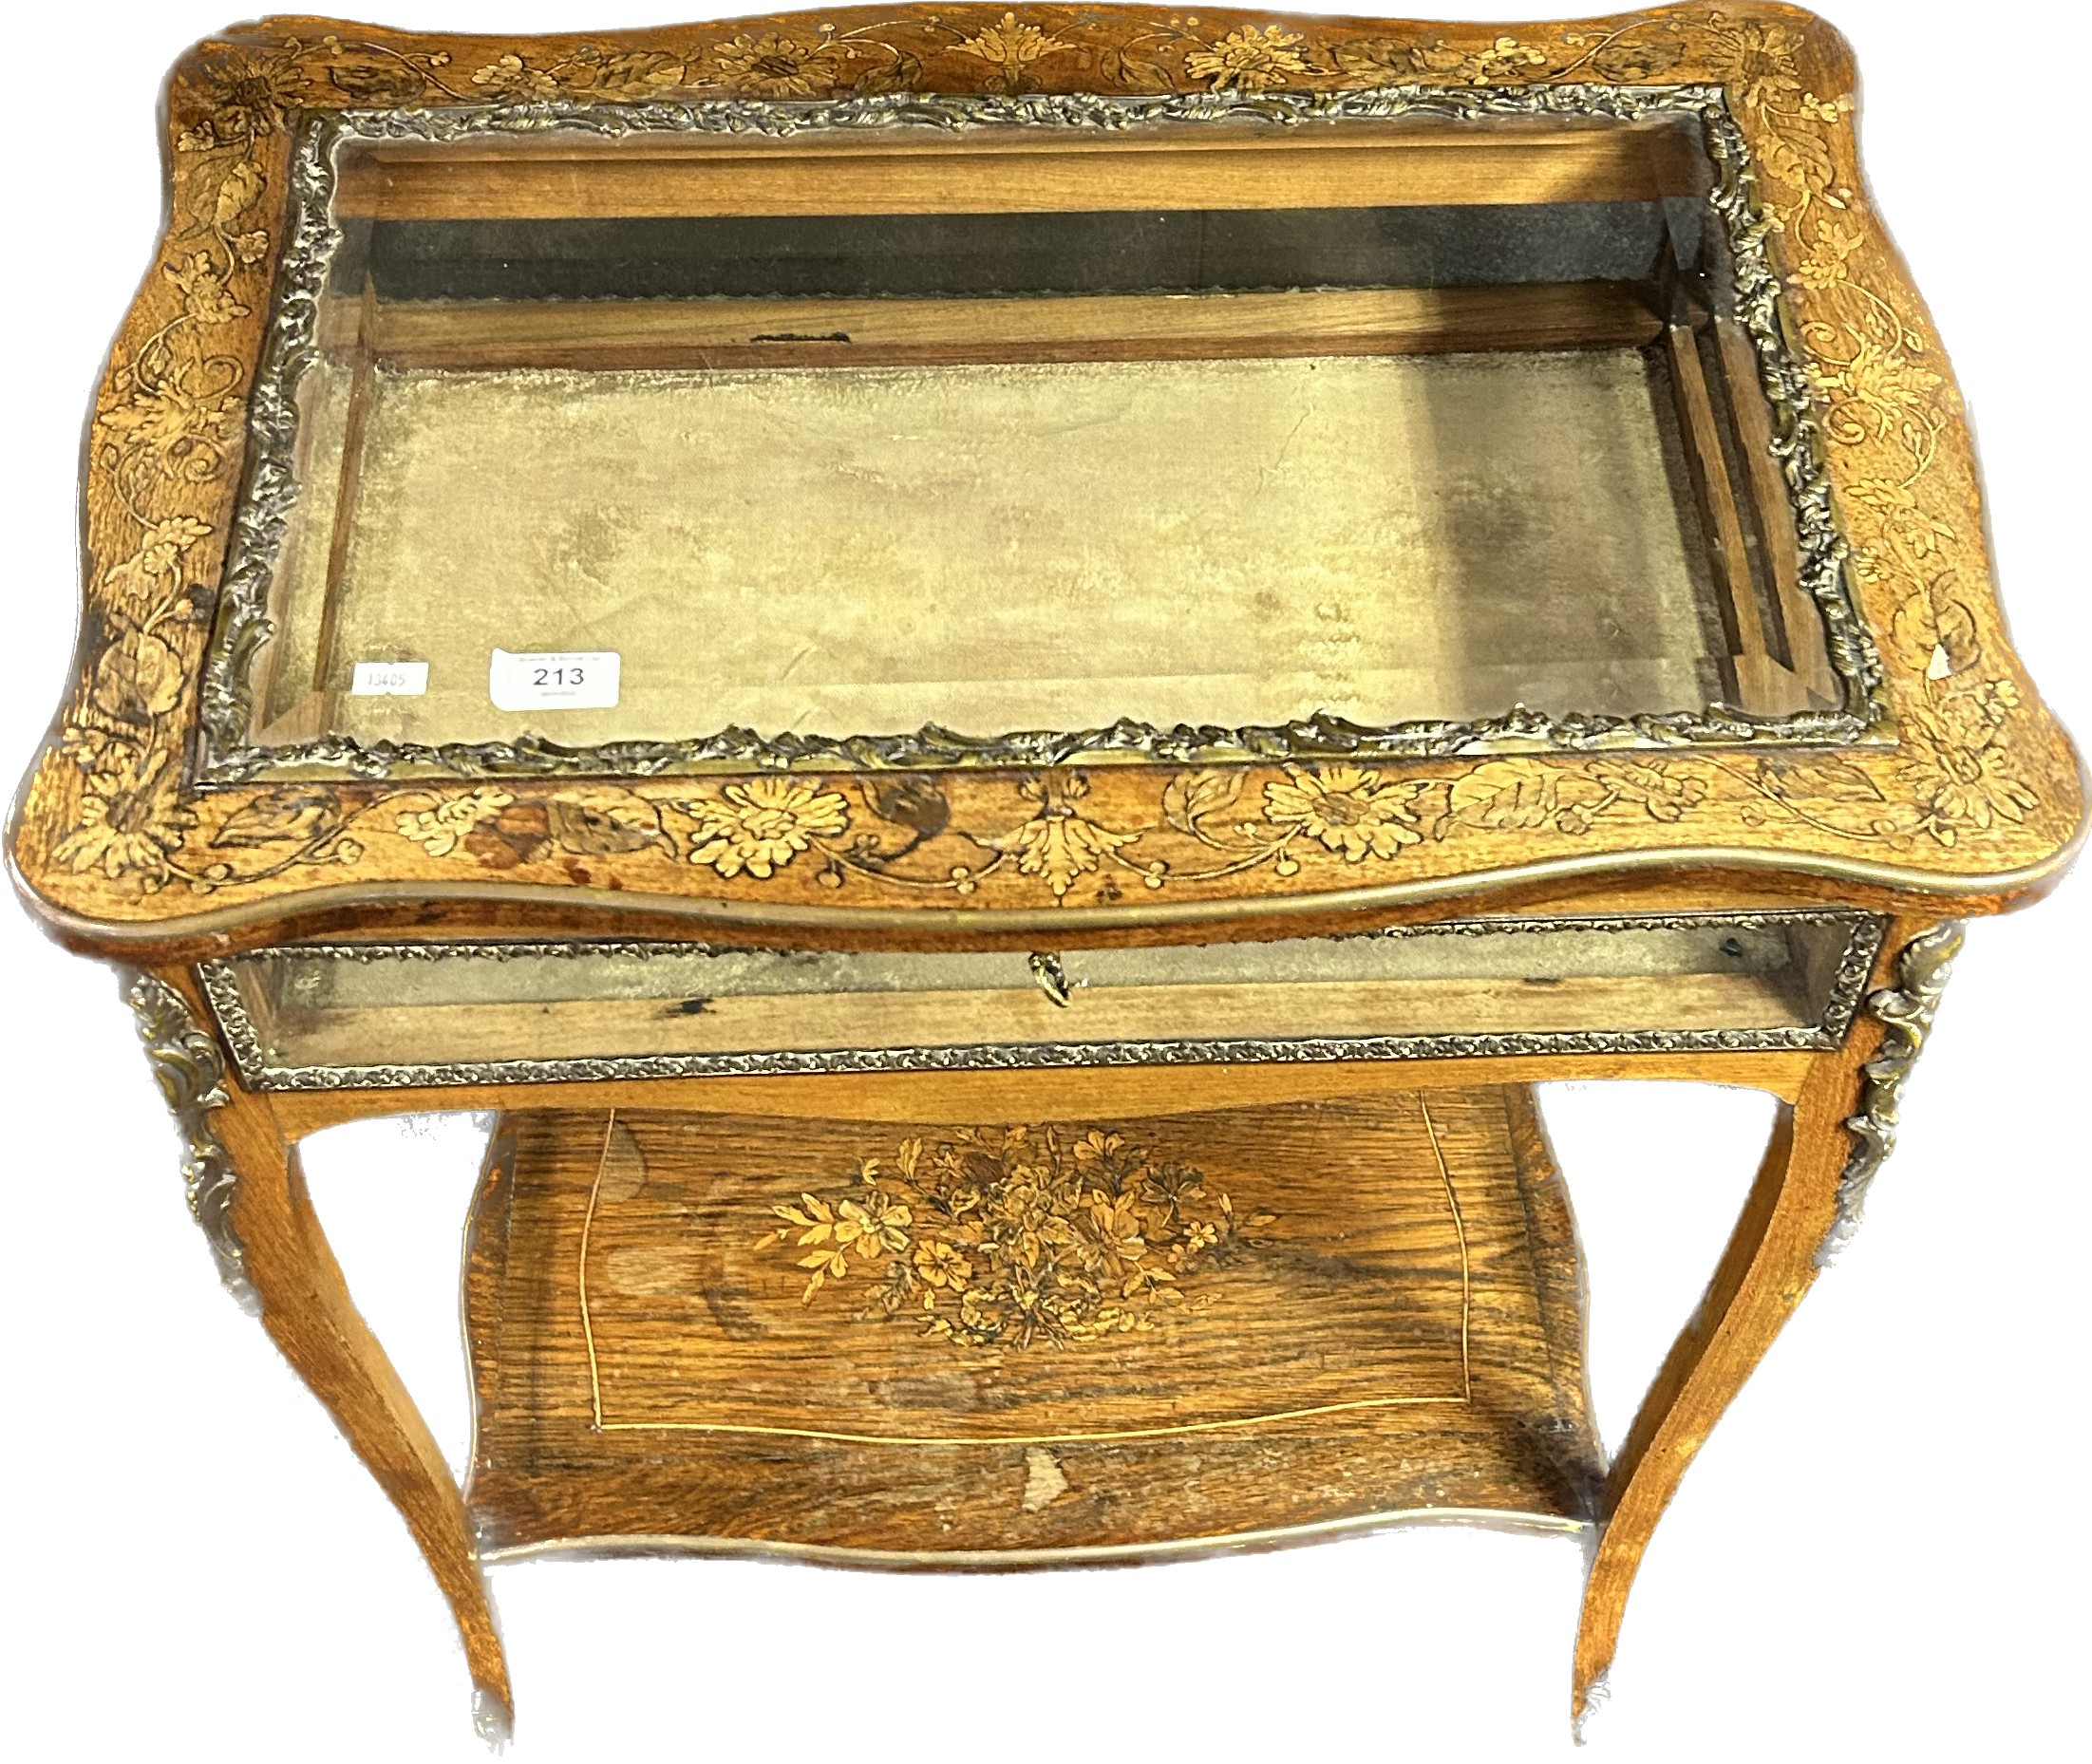 19th Century mahogany Louis XV style bijouterie cabinet, the lift top with carved foliage design and - Image 3 of 3